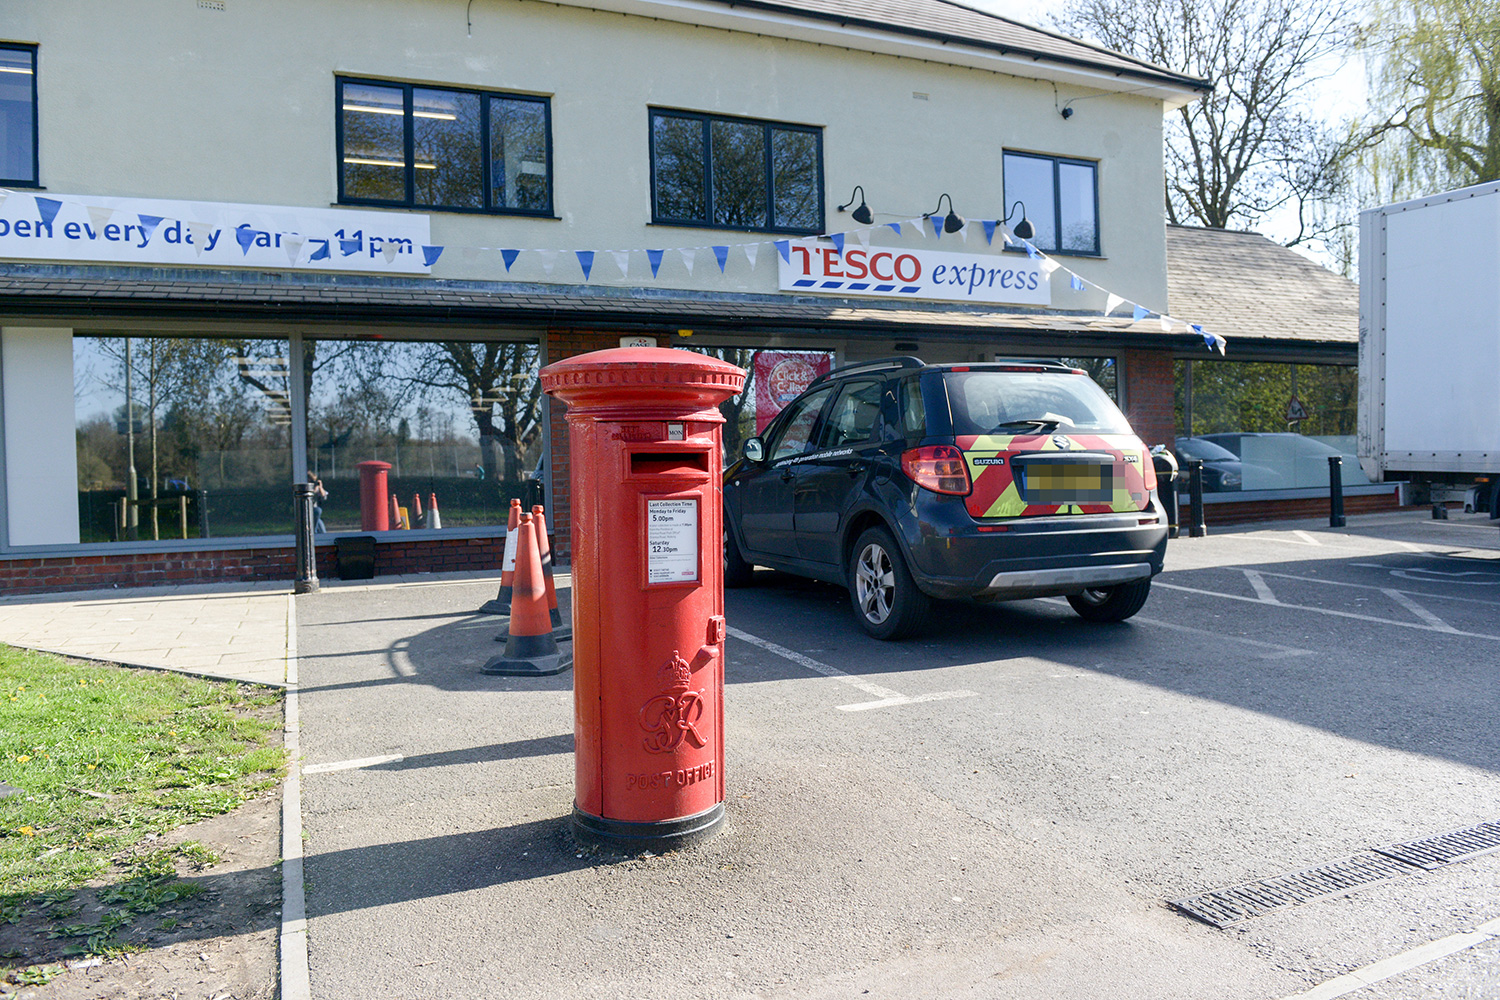 BRITAIN’S WORST PARKING SPACE IS BLOCKED IN BY POST BOX